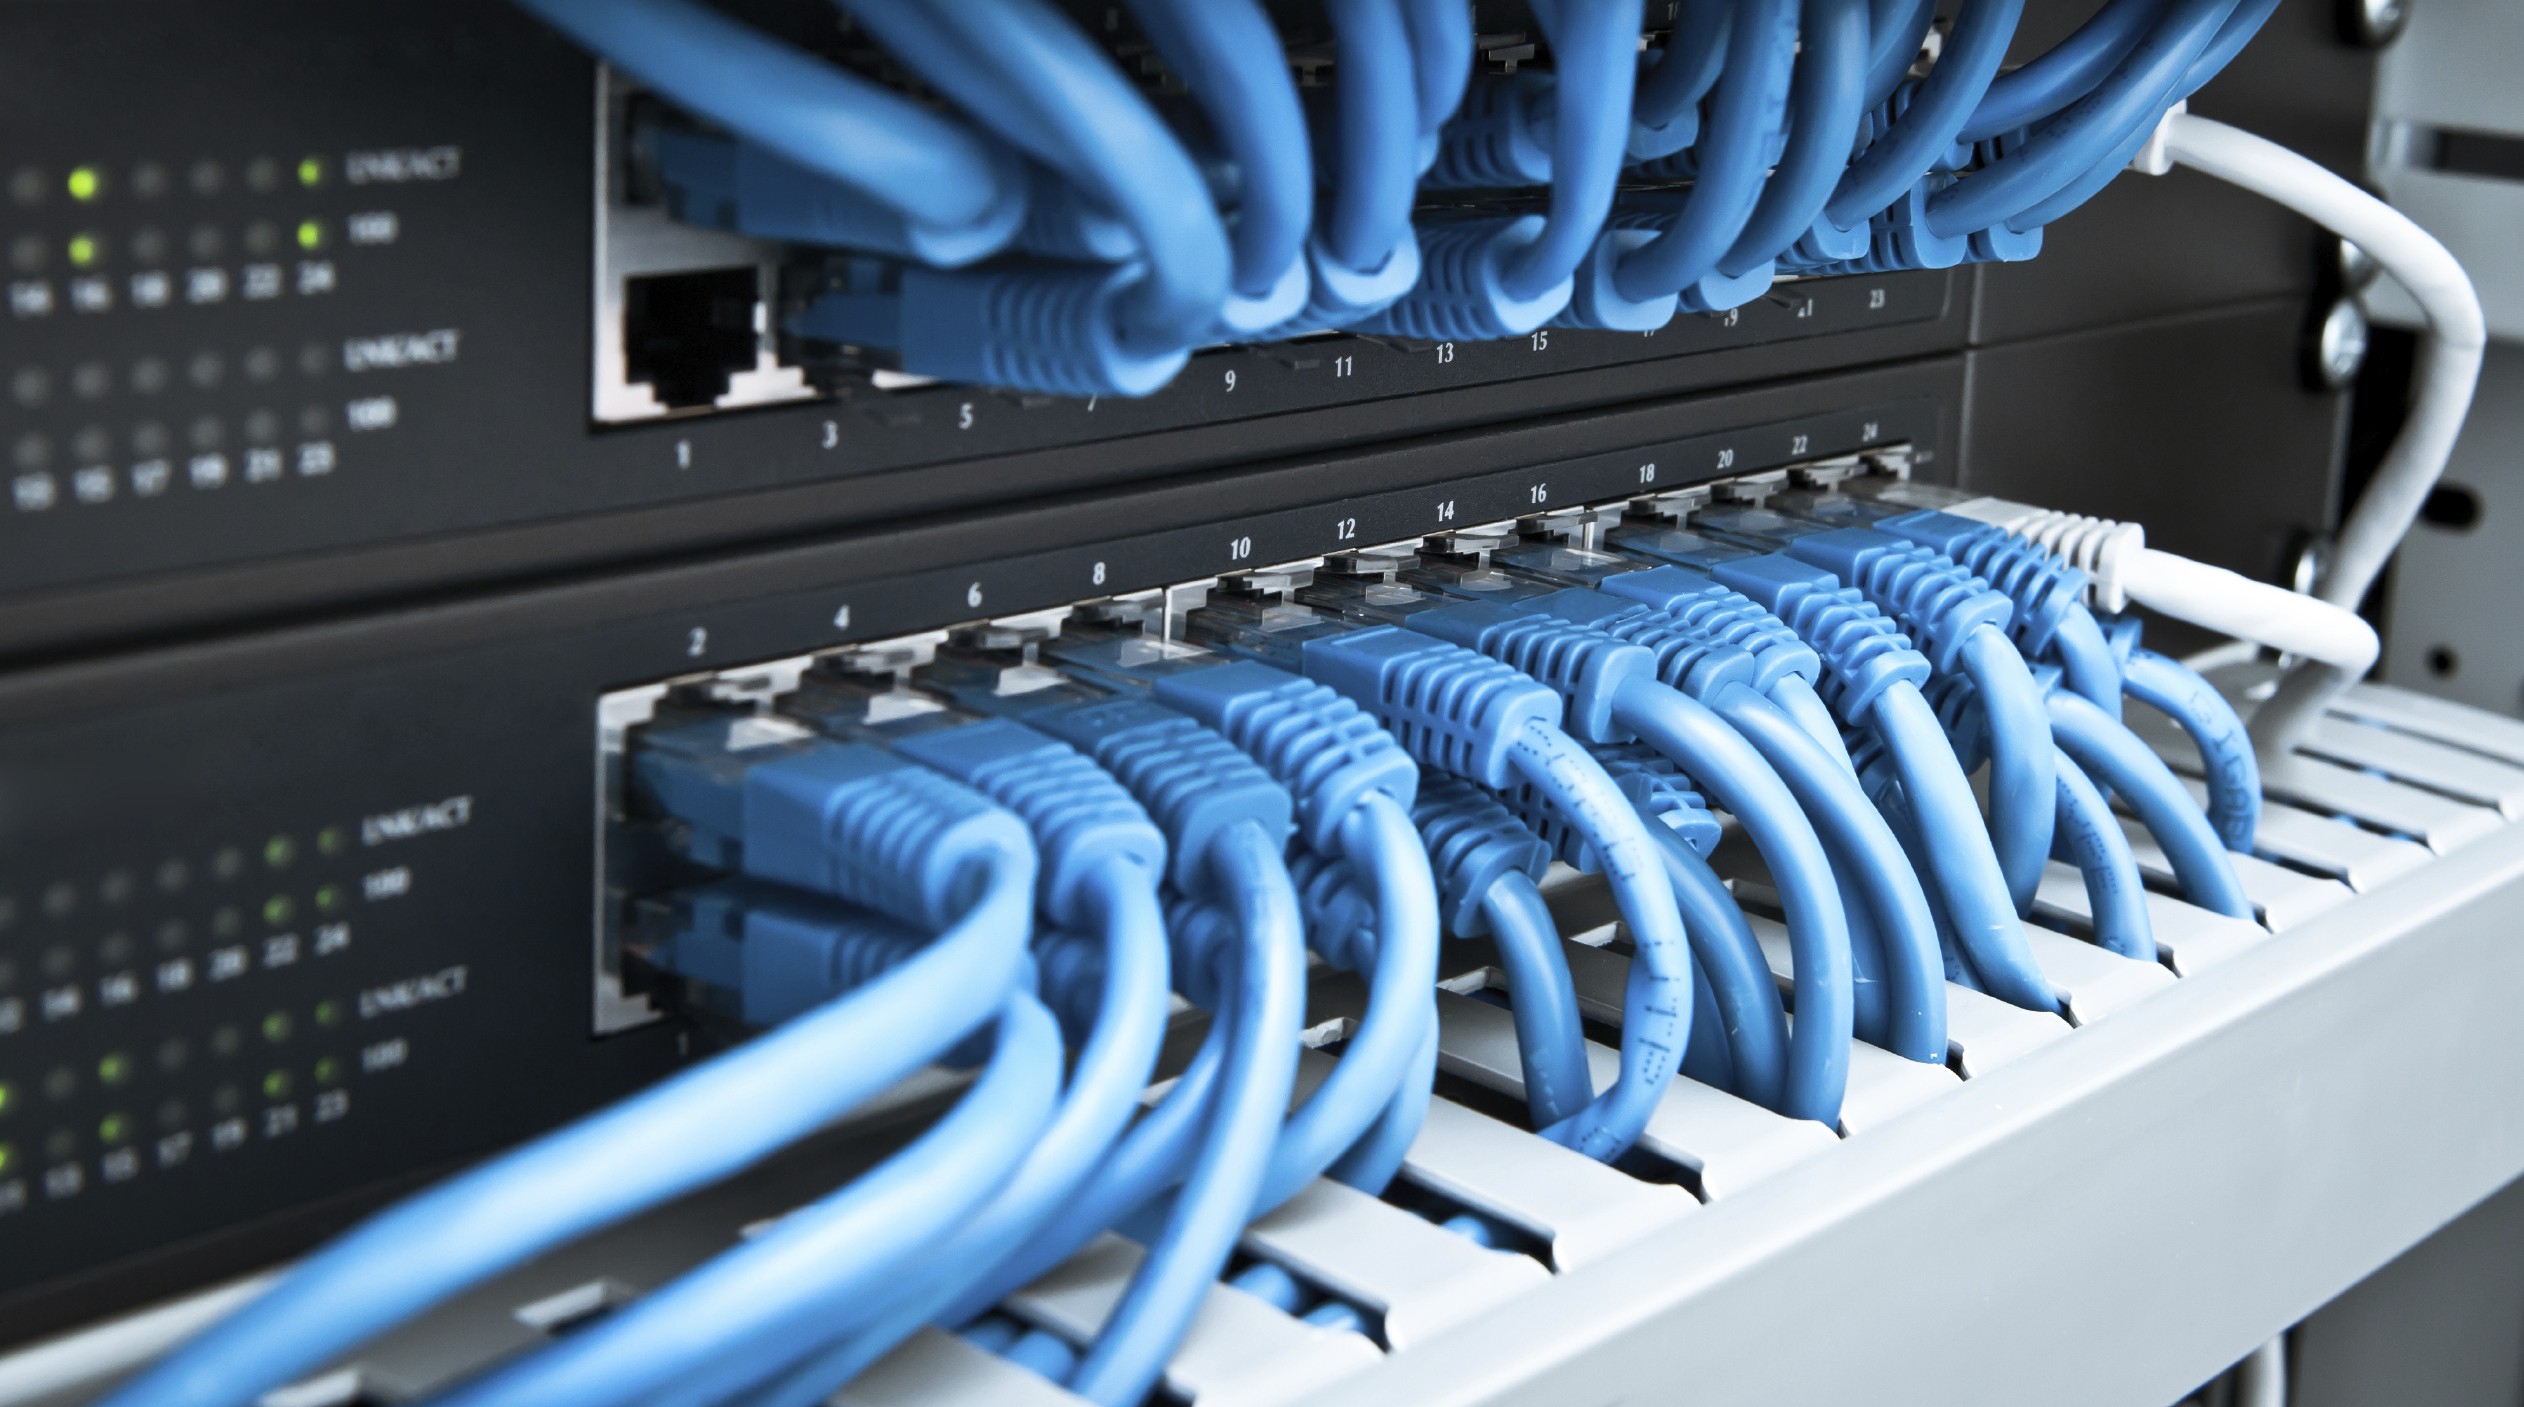 Douglas GA Top Quality On Site Cabling for Voice & Data Networks, Low Voltage Services